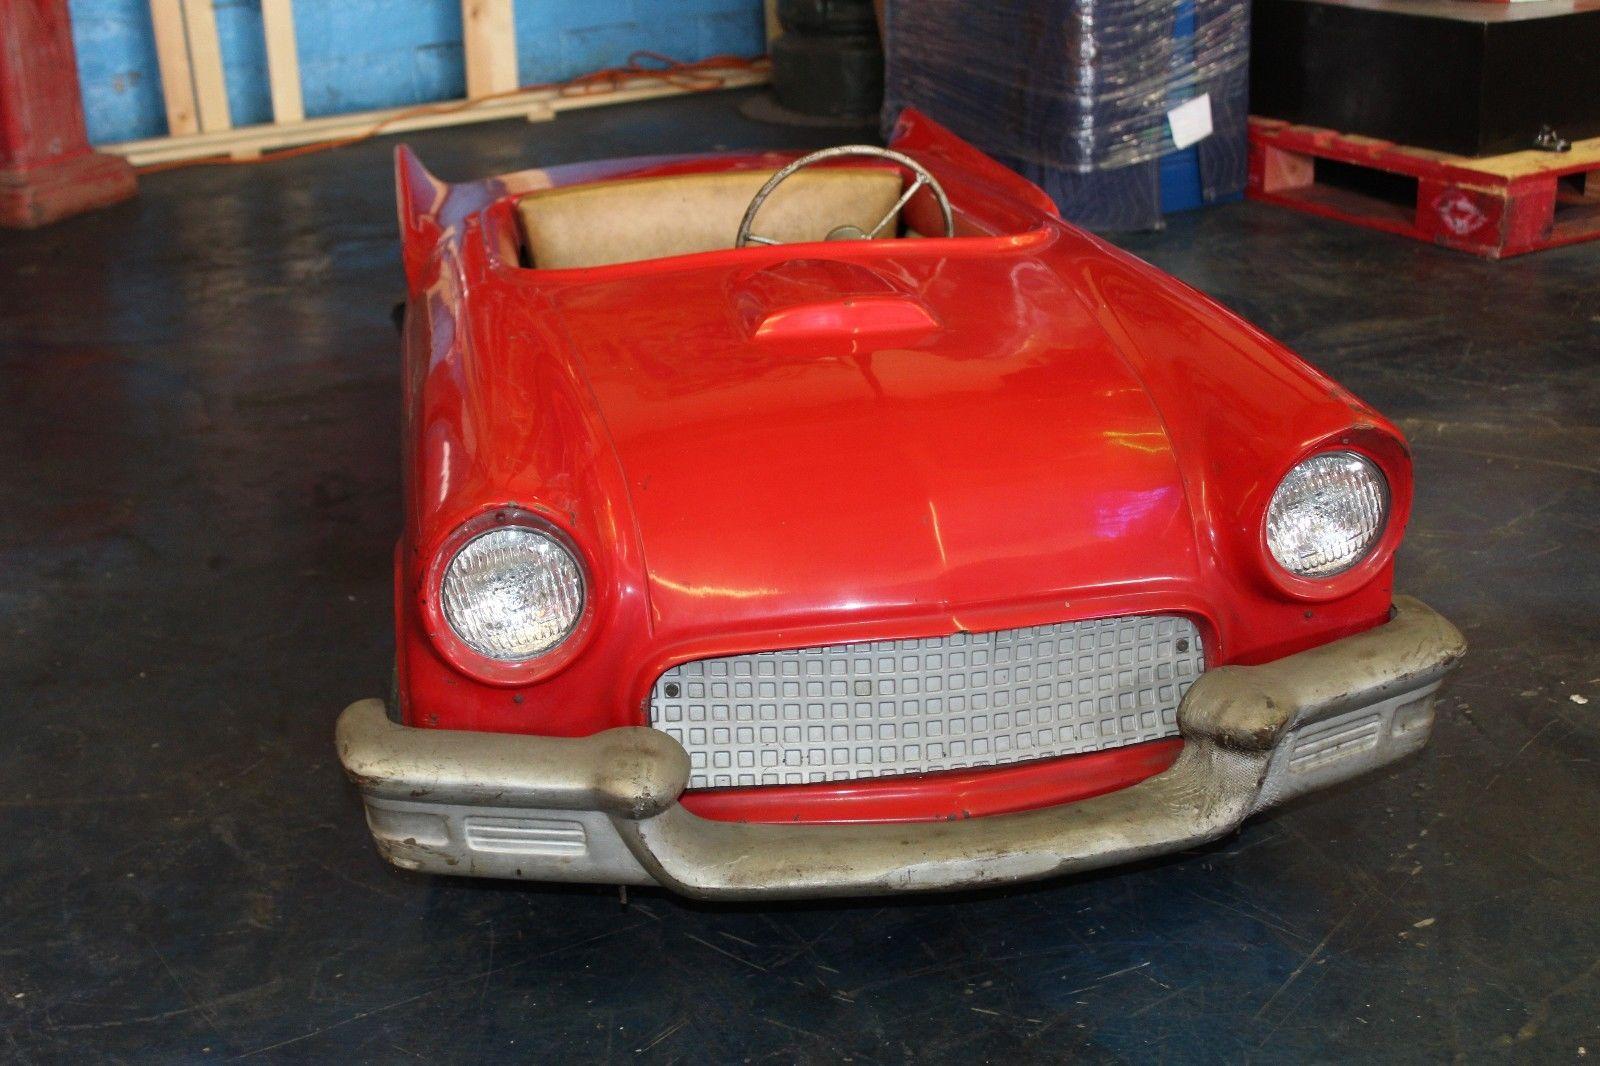 Vintage Promotional cars of the 1950s and 1960s with fiberglass or plastic bodies that were assembled to replicate full size production cars! The Powercar company of Mystic Connecticut started making the Thunderbird JR in 1955 and continued through